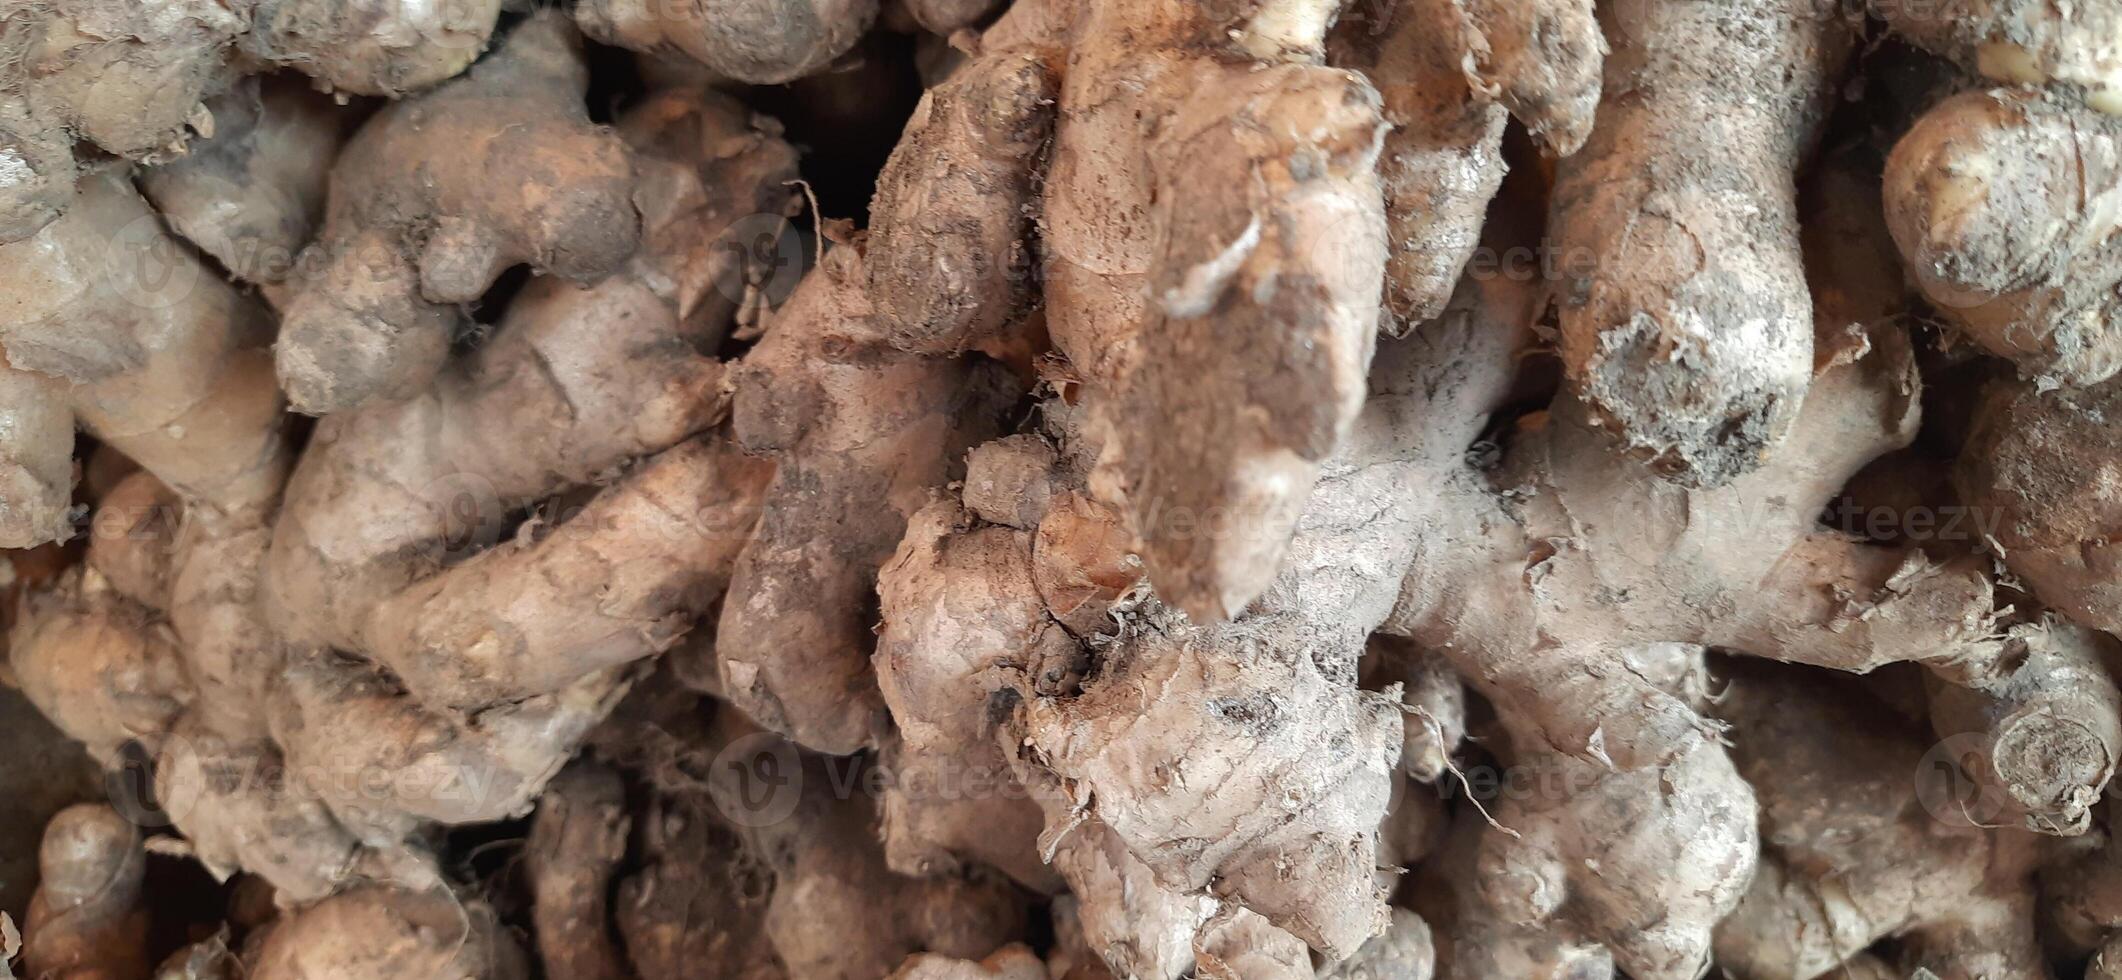 Heap of fresh ginger roots sold in traditional market Indonesia photo